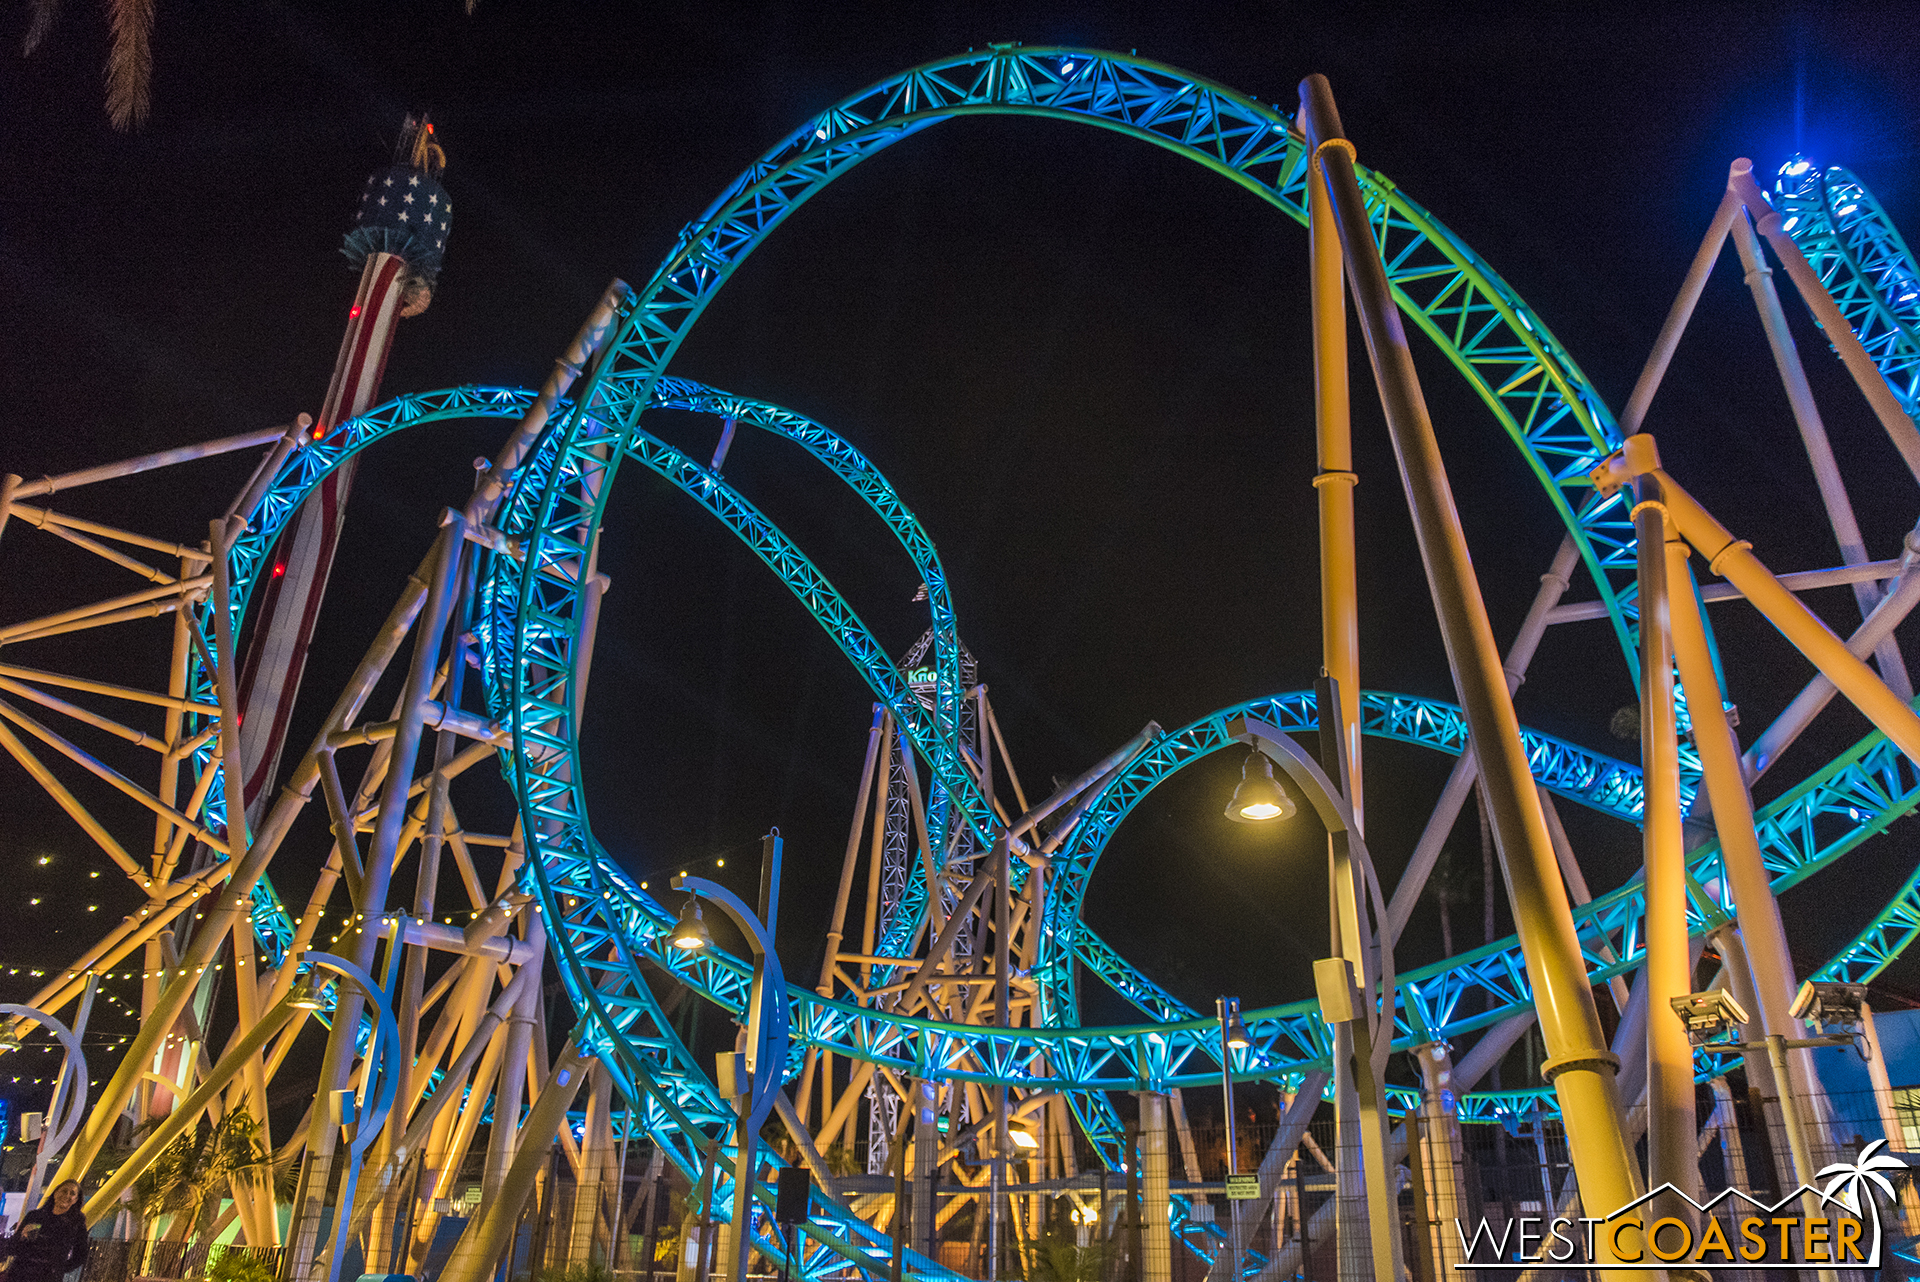  The lighting really showcases this ride like an ocean jewel. 